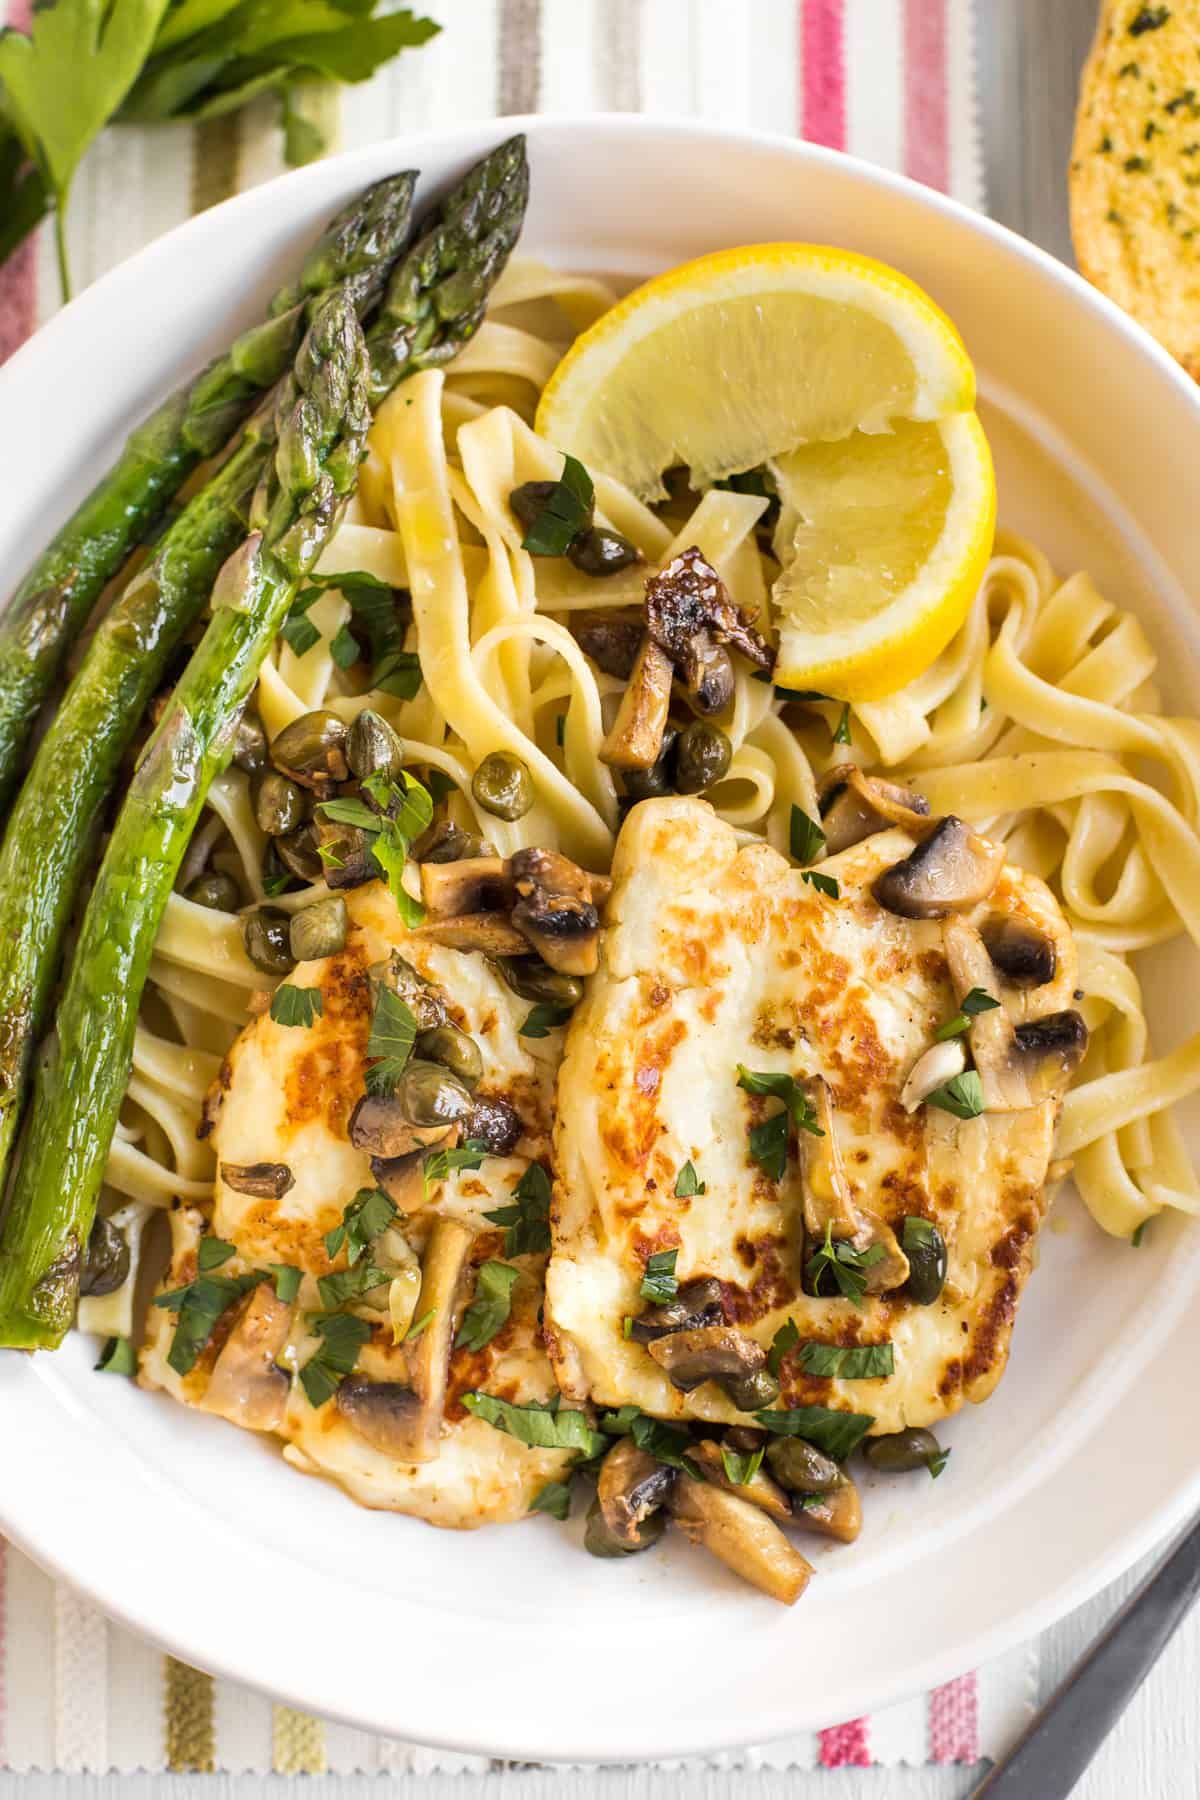 Portion of halloumi piccata served with tagliatelle and asparagus